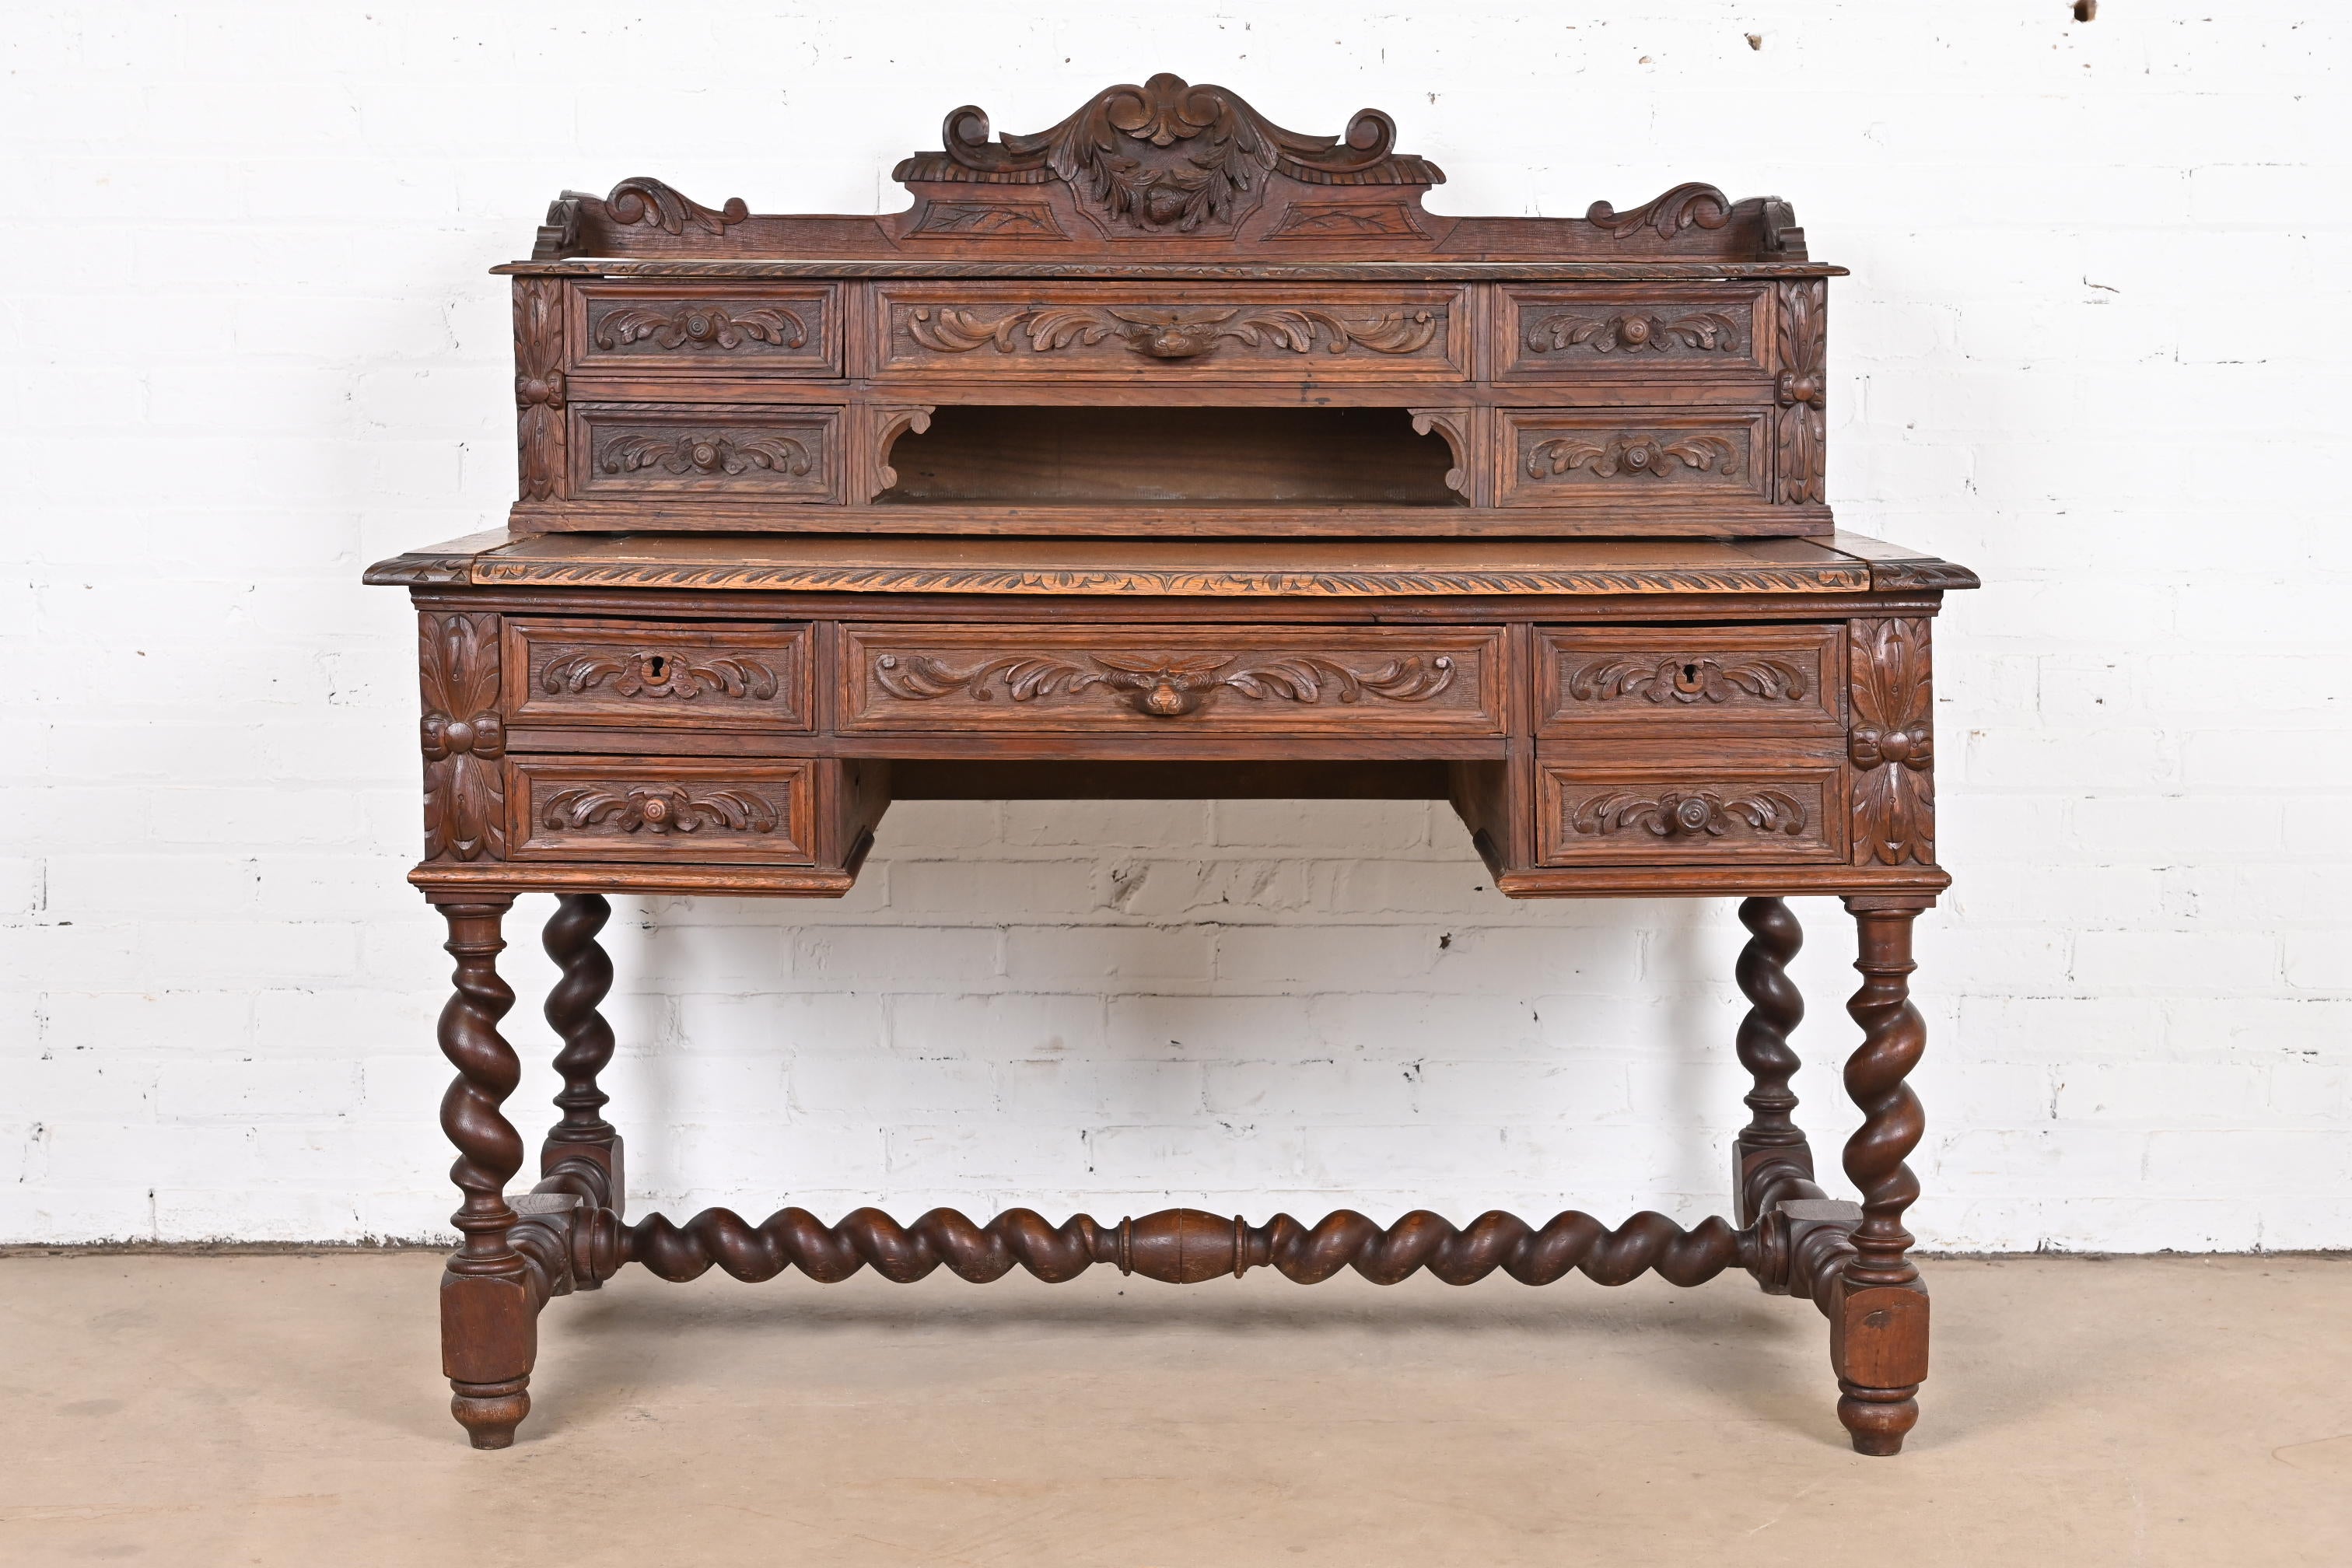 An exceptional antique Henri II or Renaissance Revival ornate carved oak Black Forest writing desk

France, Late 19th Century

Beautiful ornate carved oak, with barley twist legs and stretcher, and slide-out writing surface.

Measures: 51